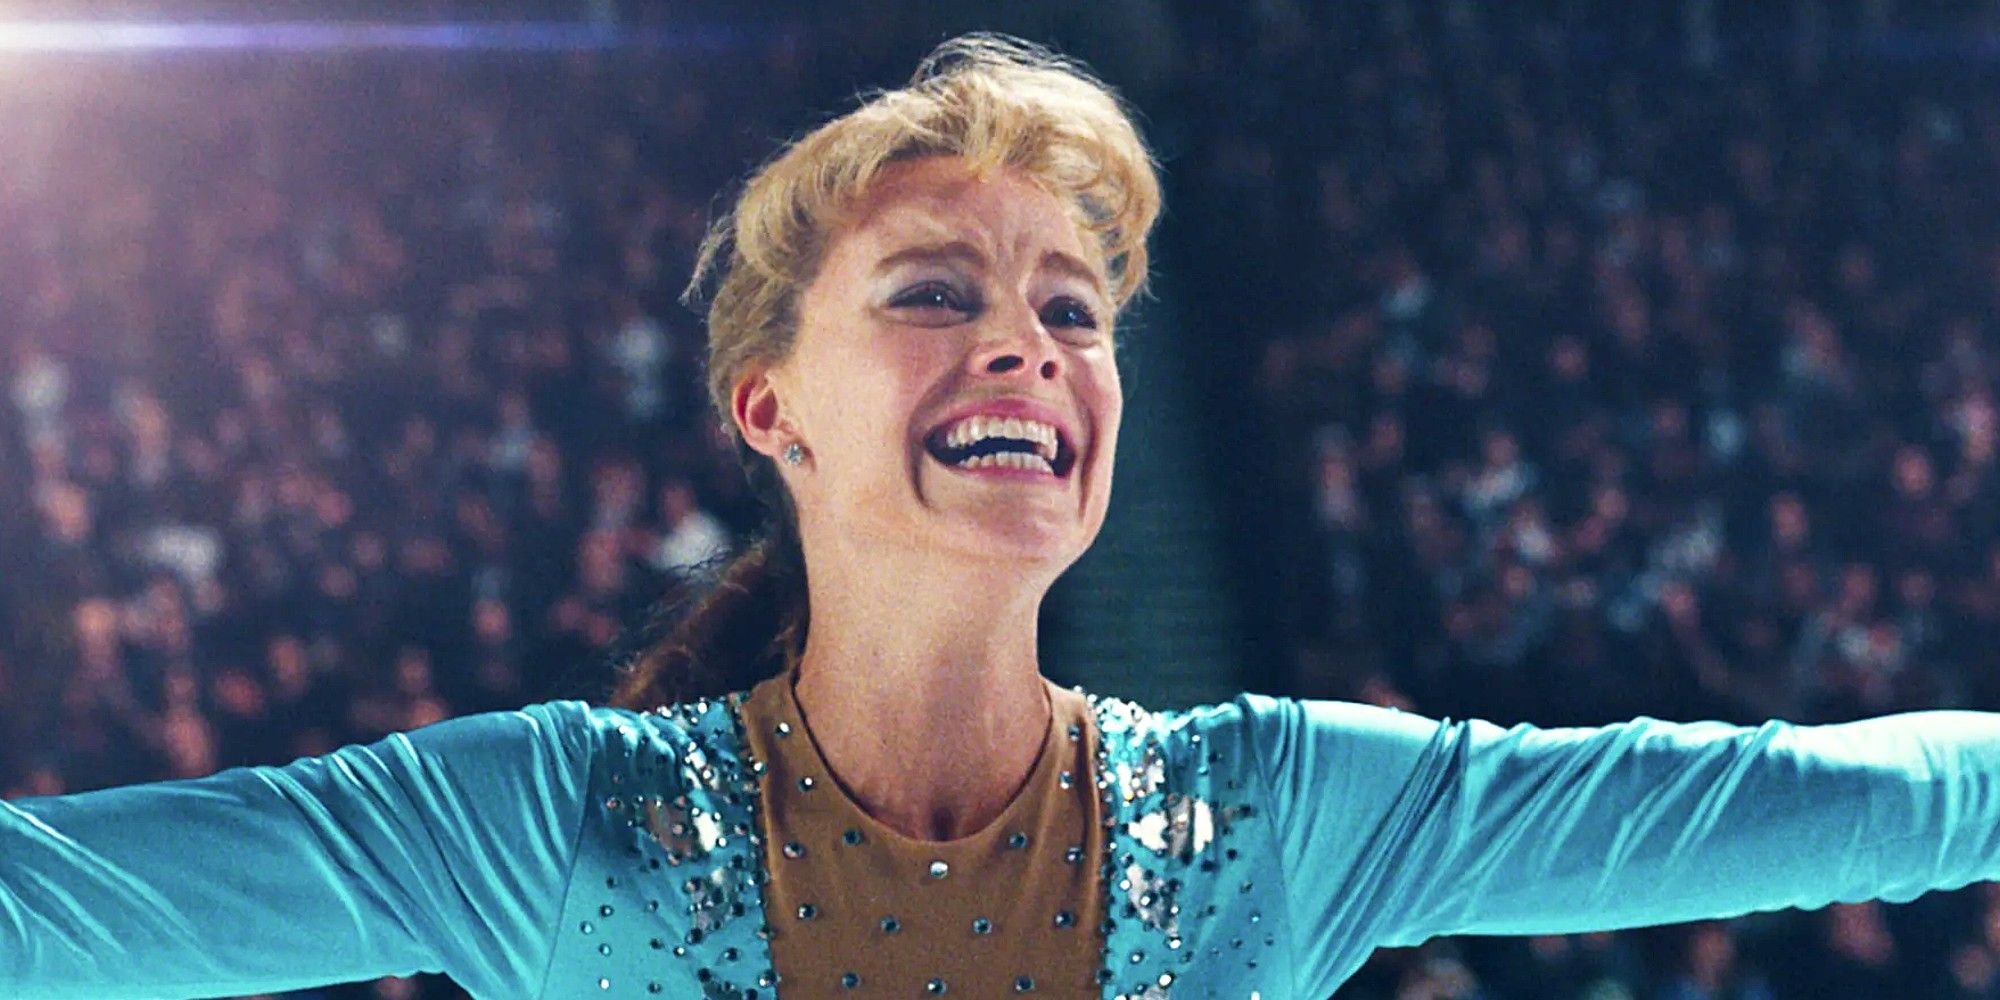 Tonya Harding skating while smiling with her arms spread in I, Tonya.